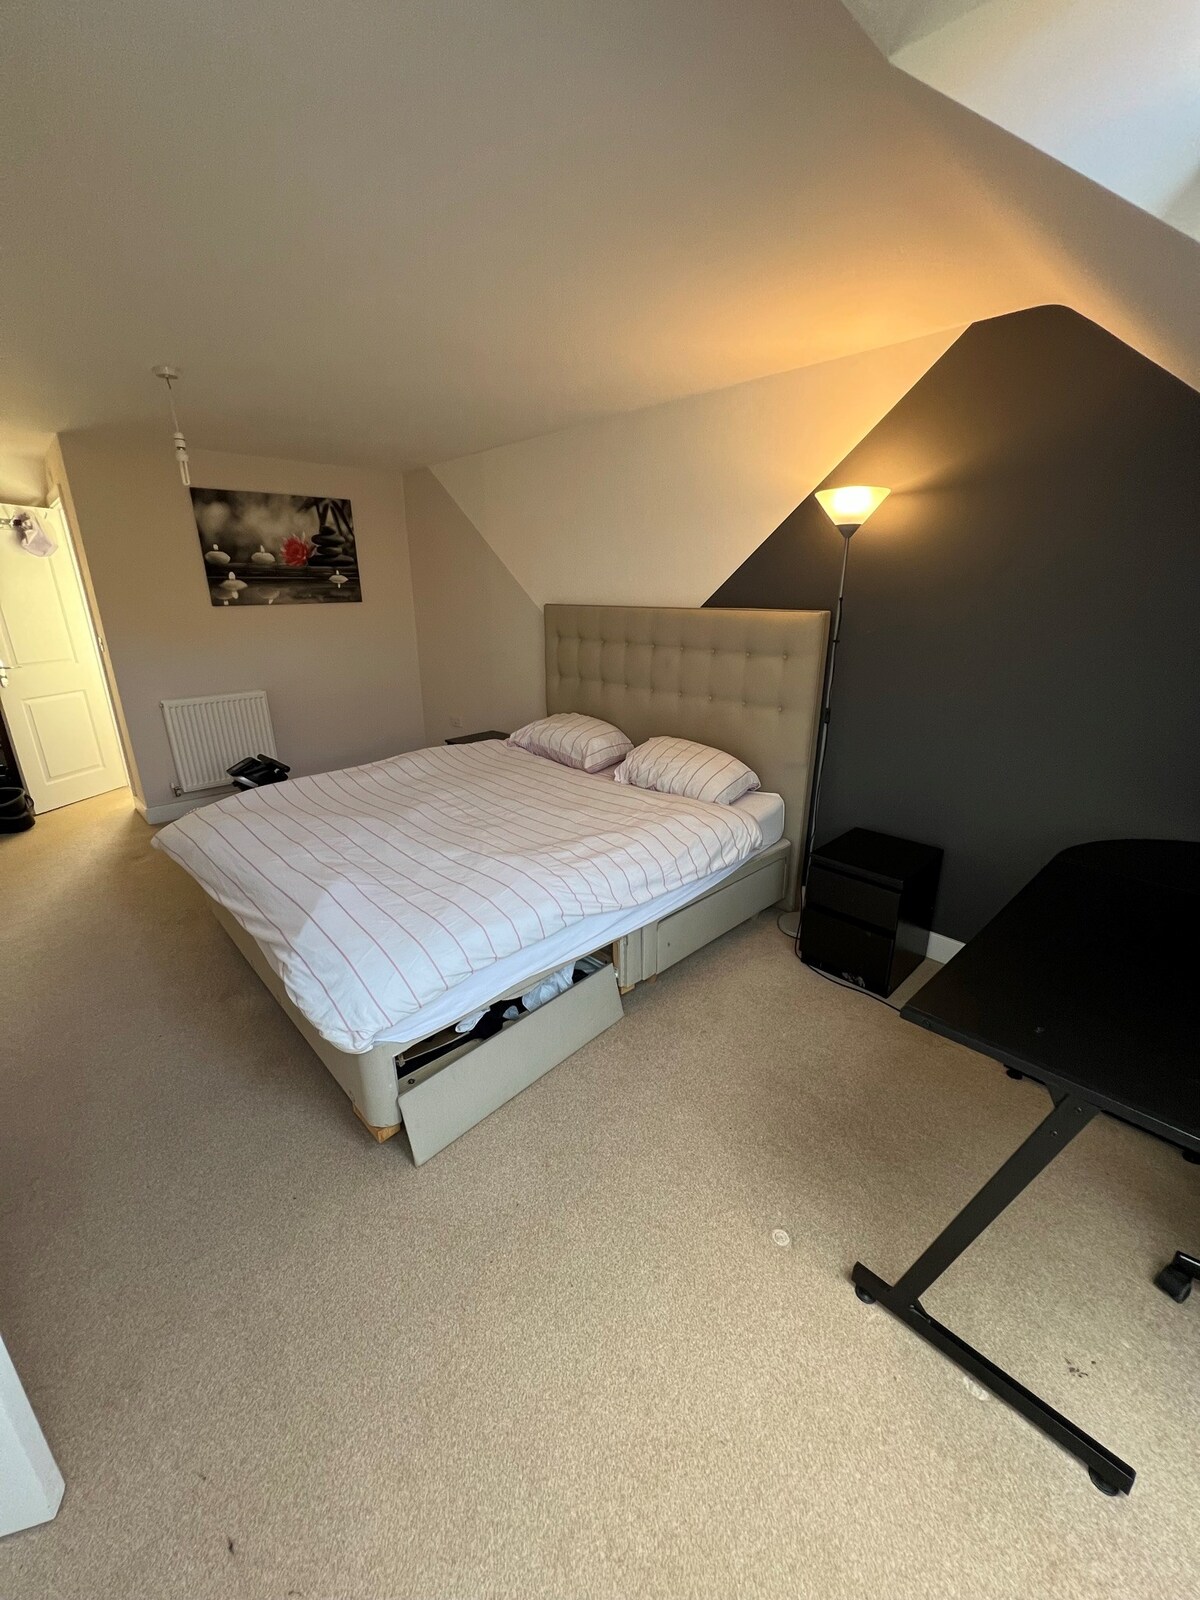 King-size bedroom in 4 bed house